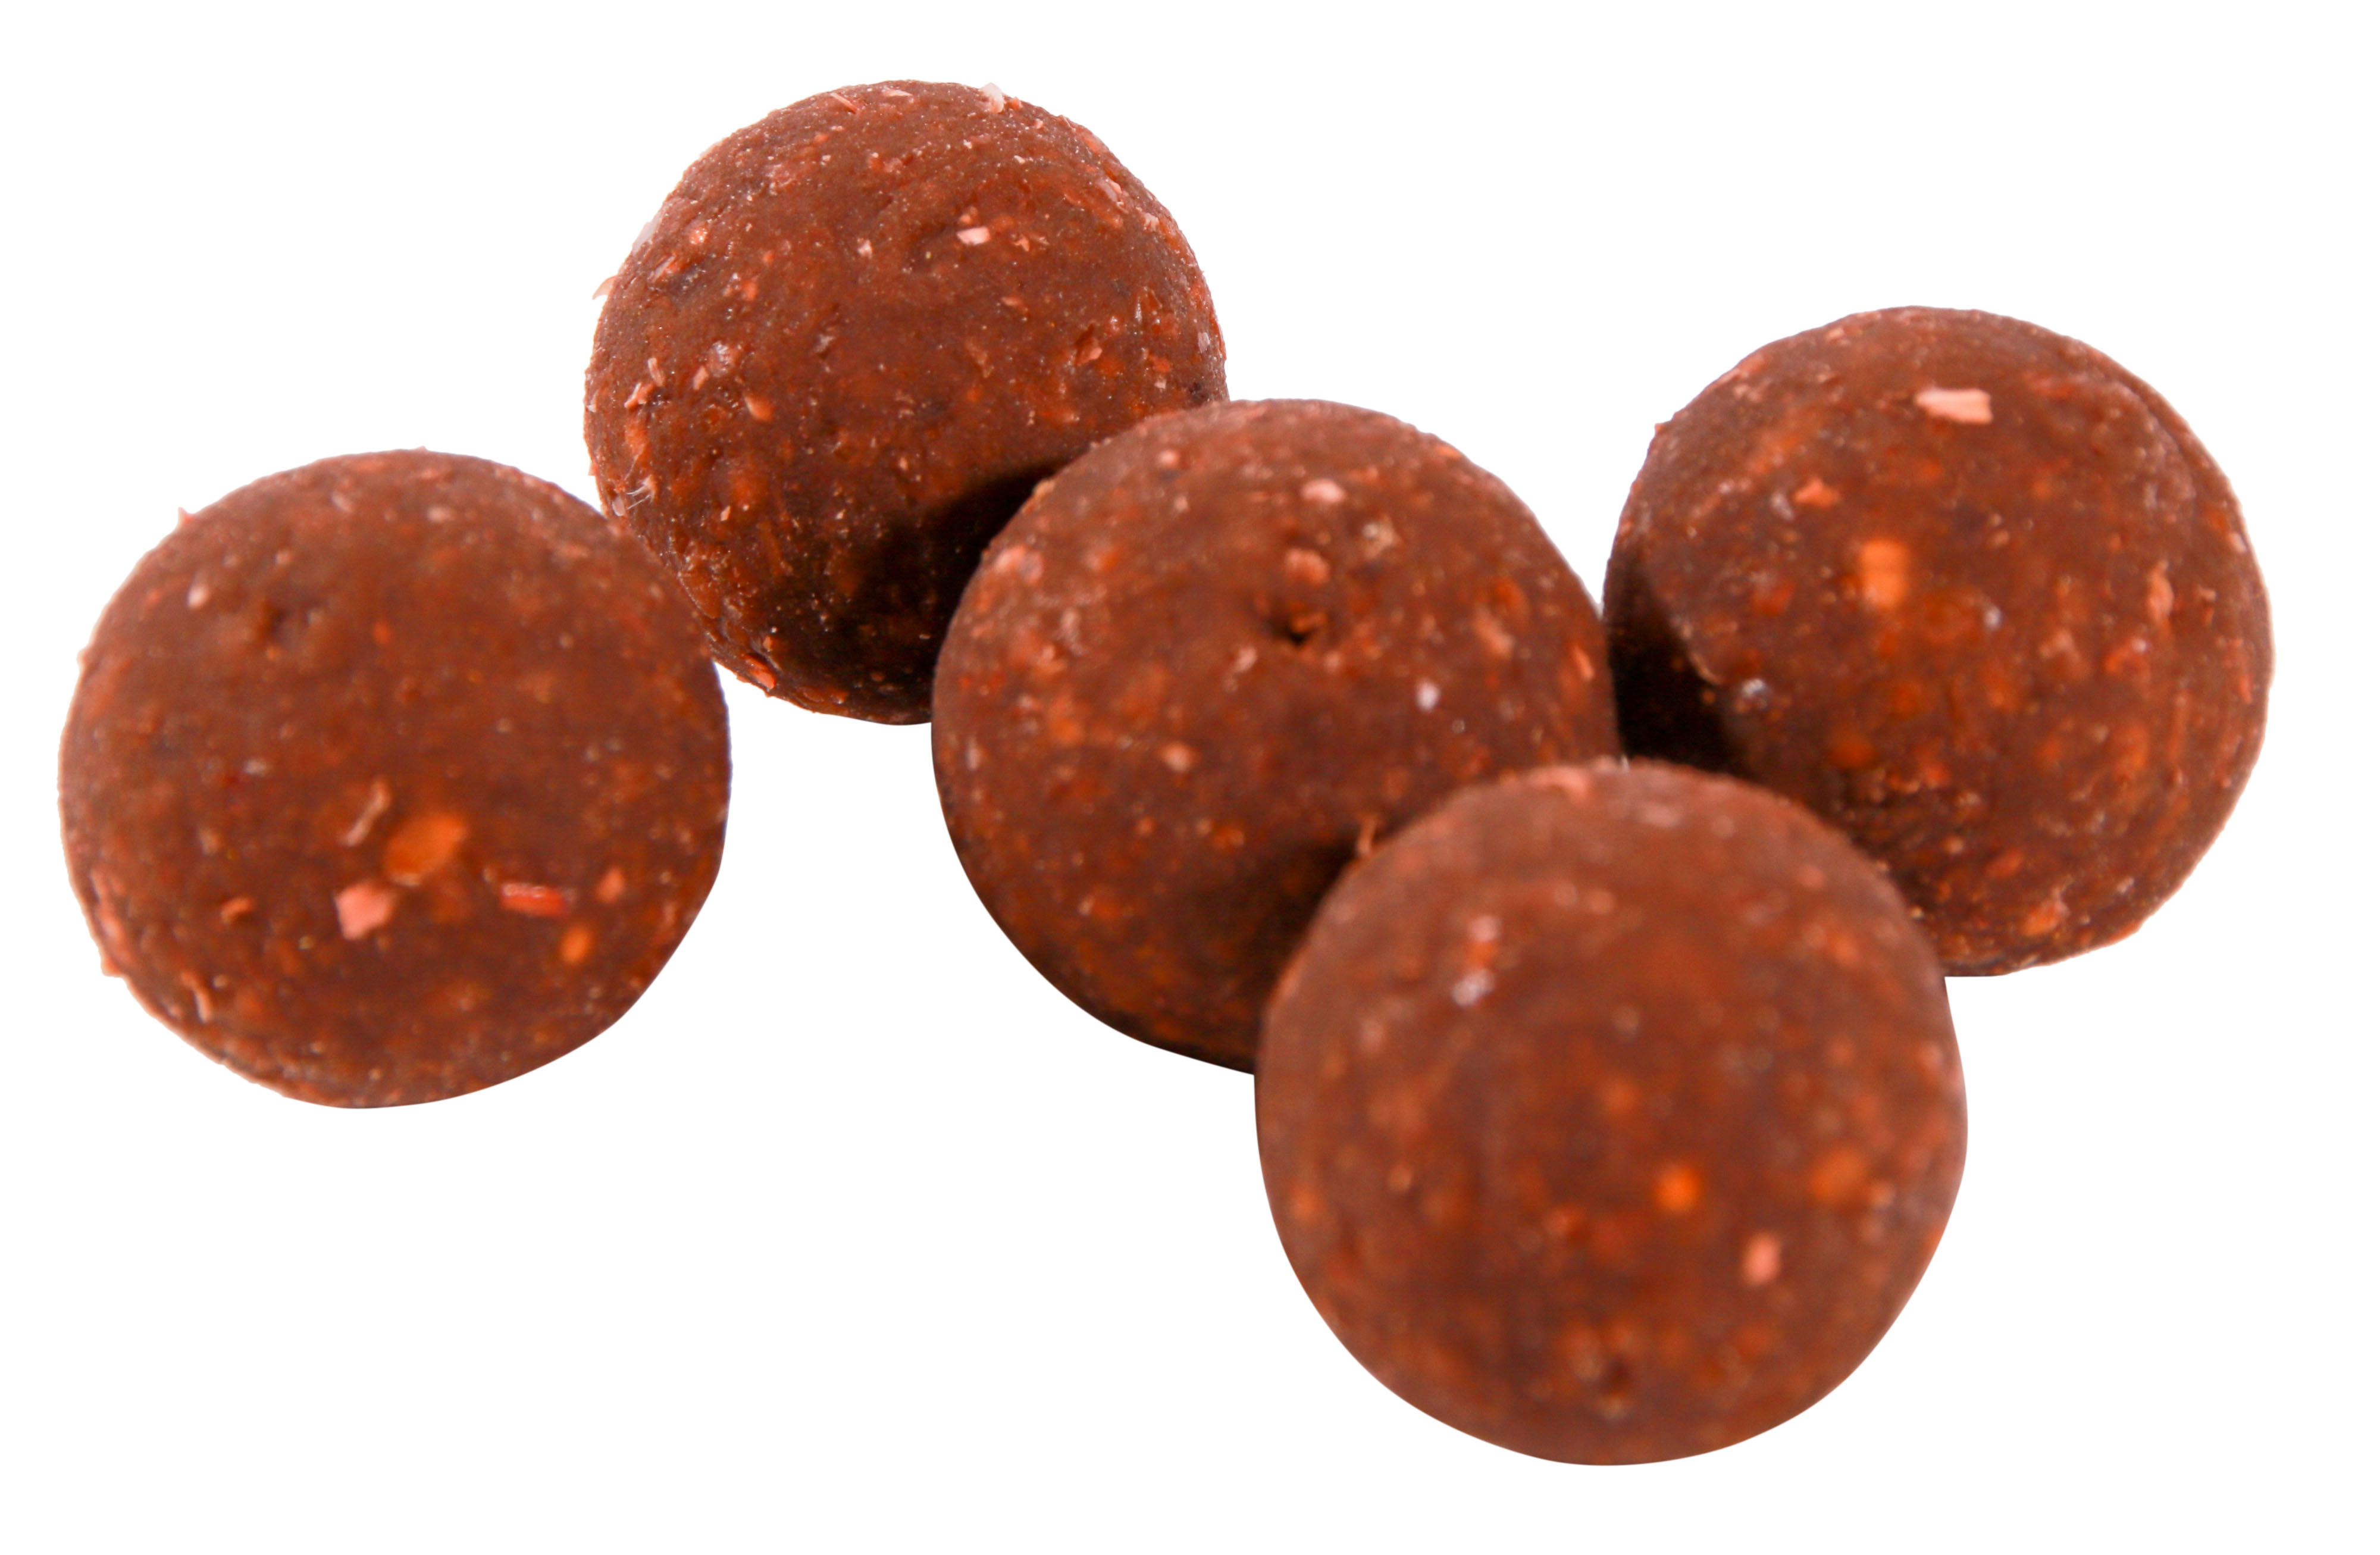 Ultimate Baits Boilies 15mm 1kg